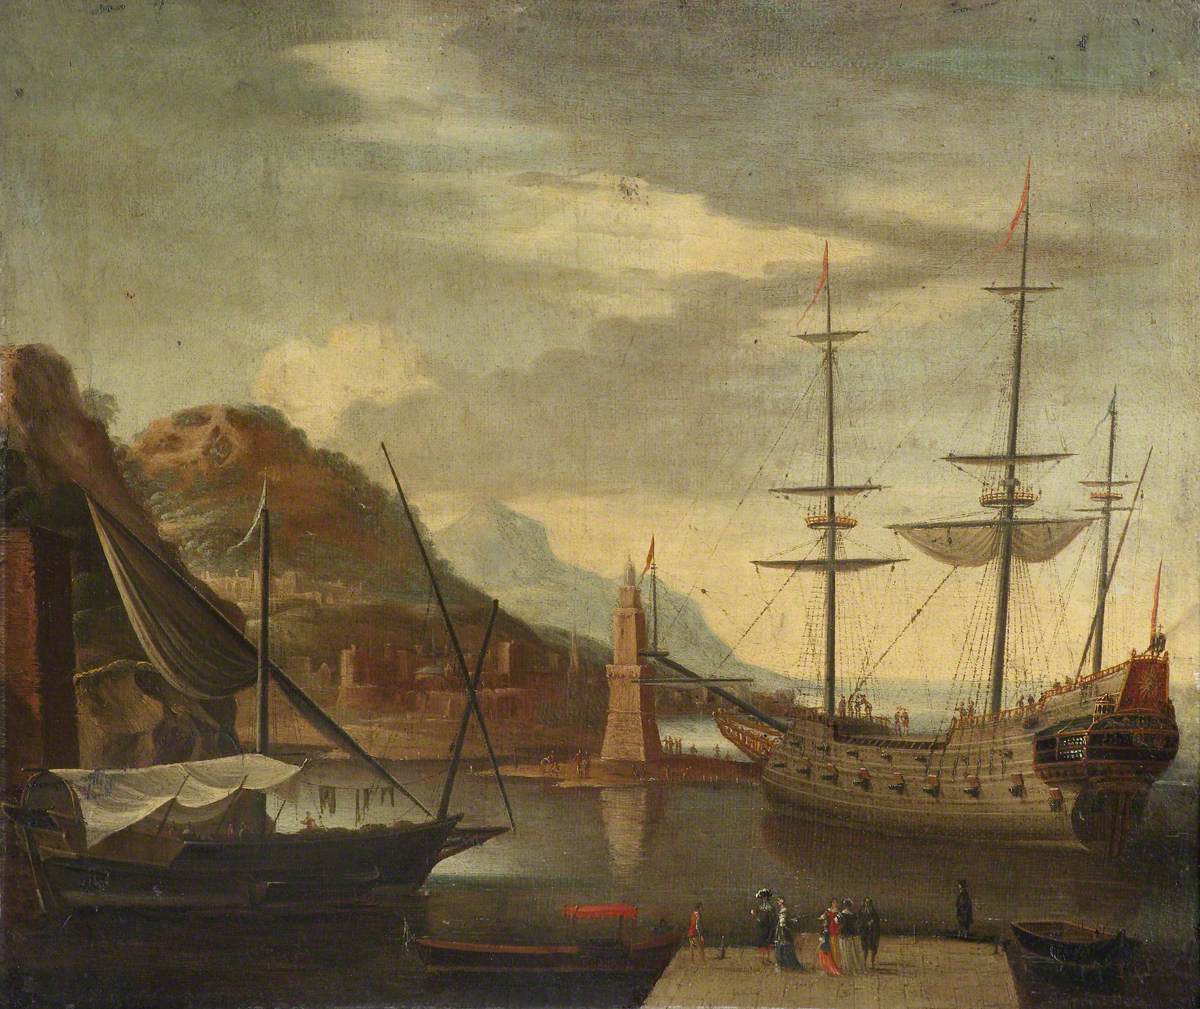 Shipping in a Mediterranean Harbour